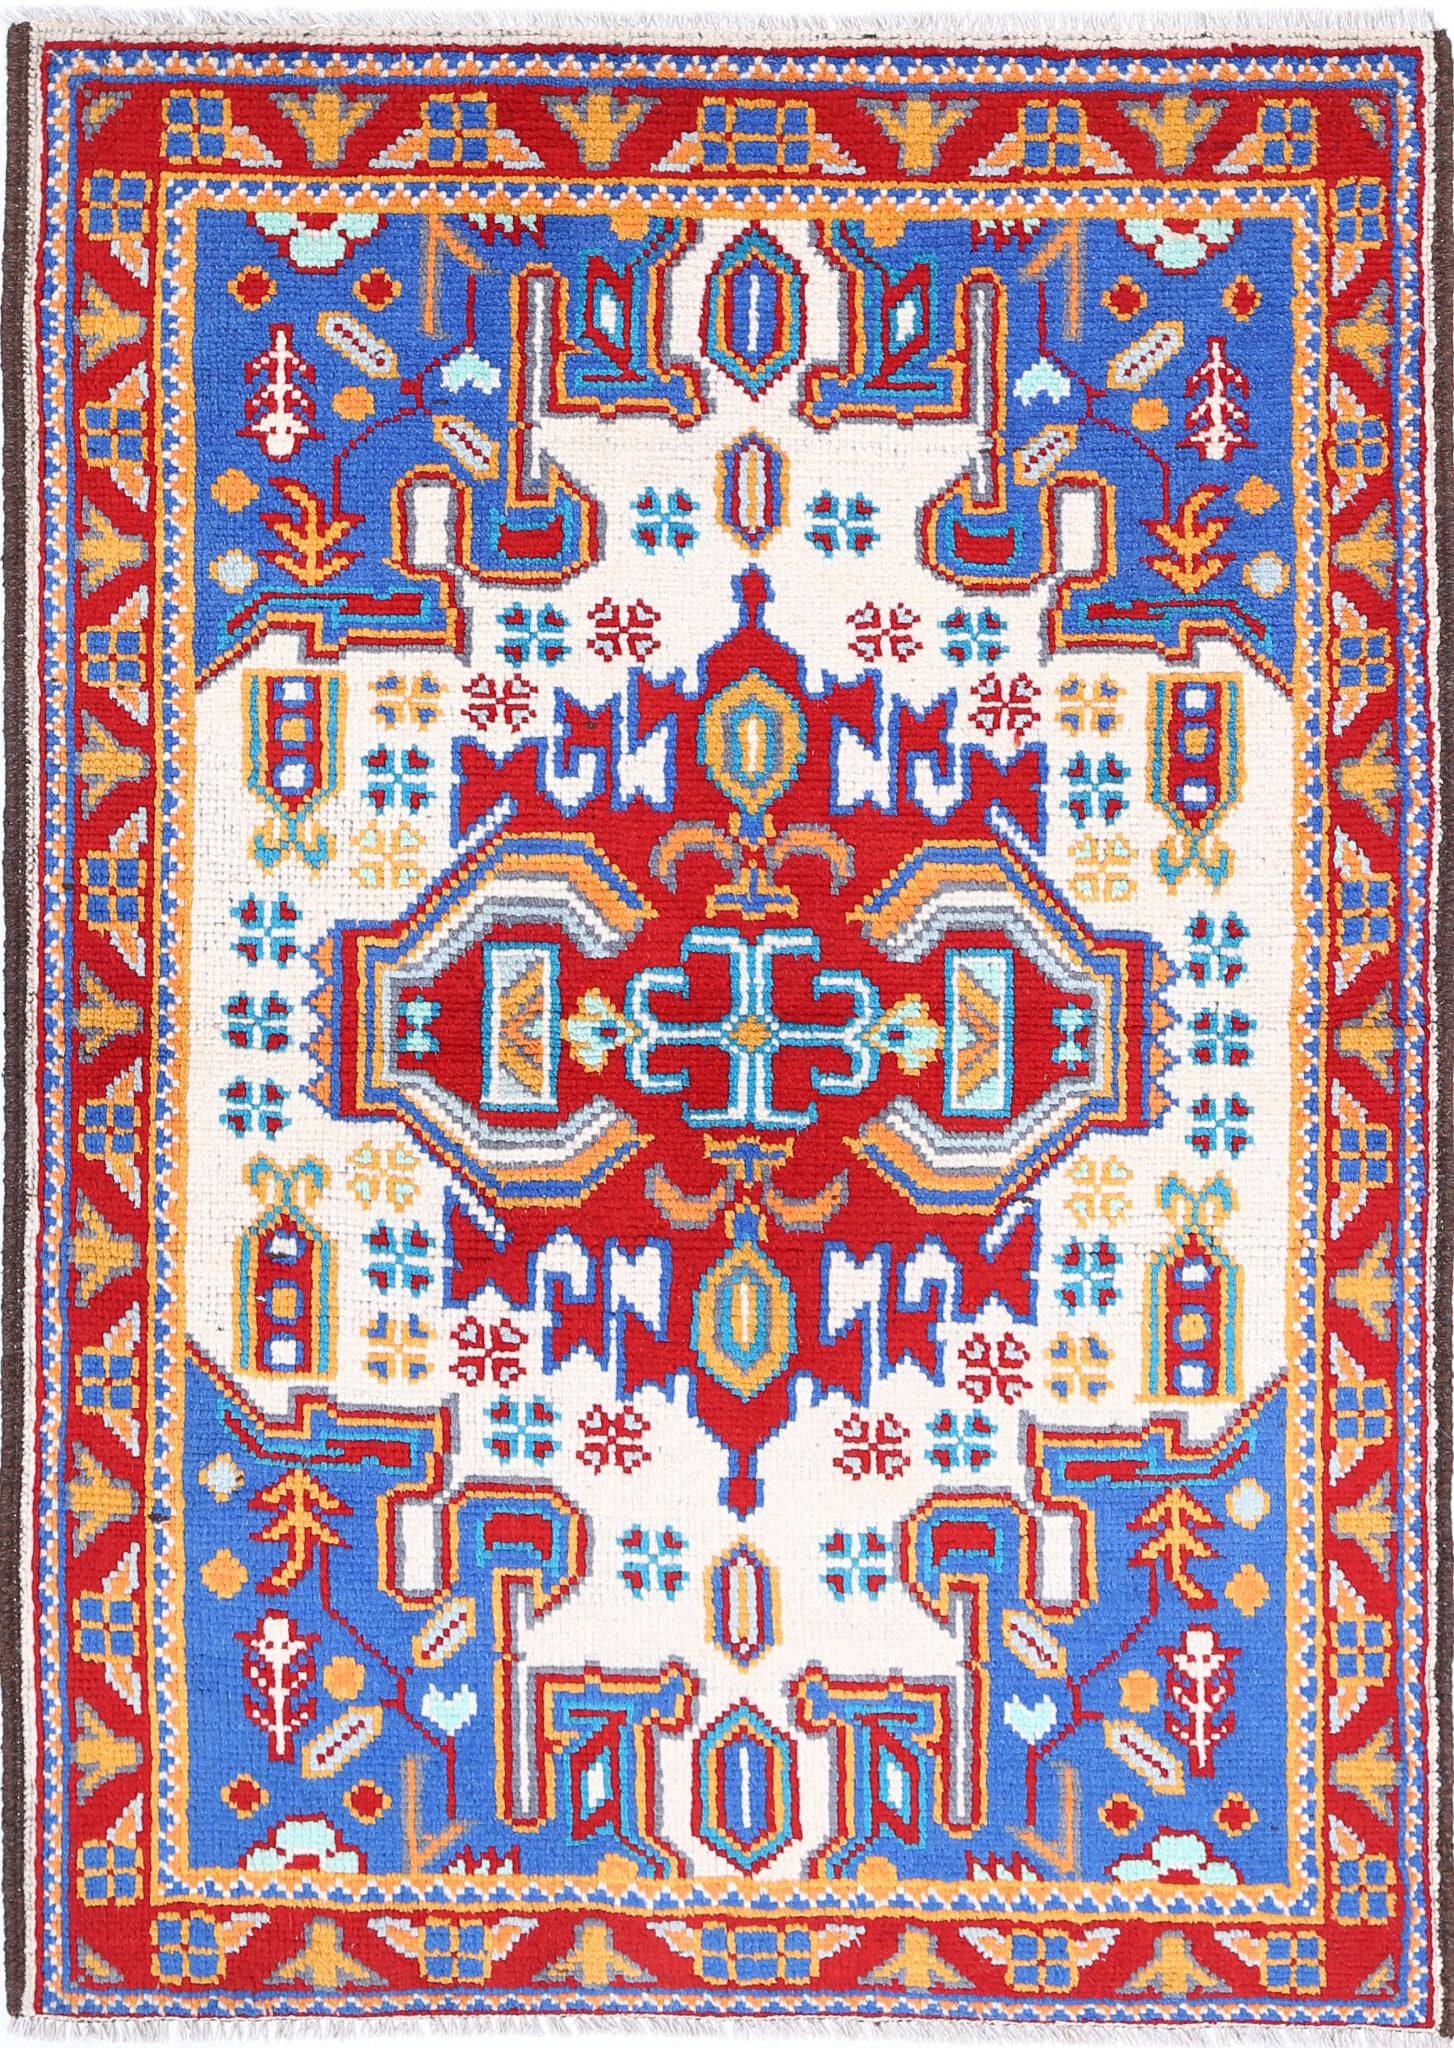 Revival-hand-knotted-qarghani-wool-rug-5014063.jpg